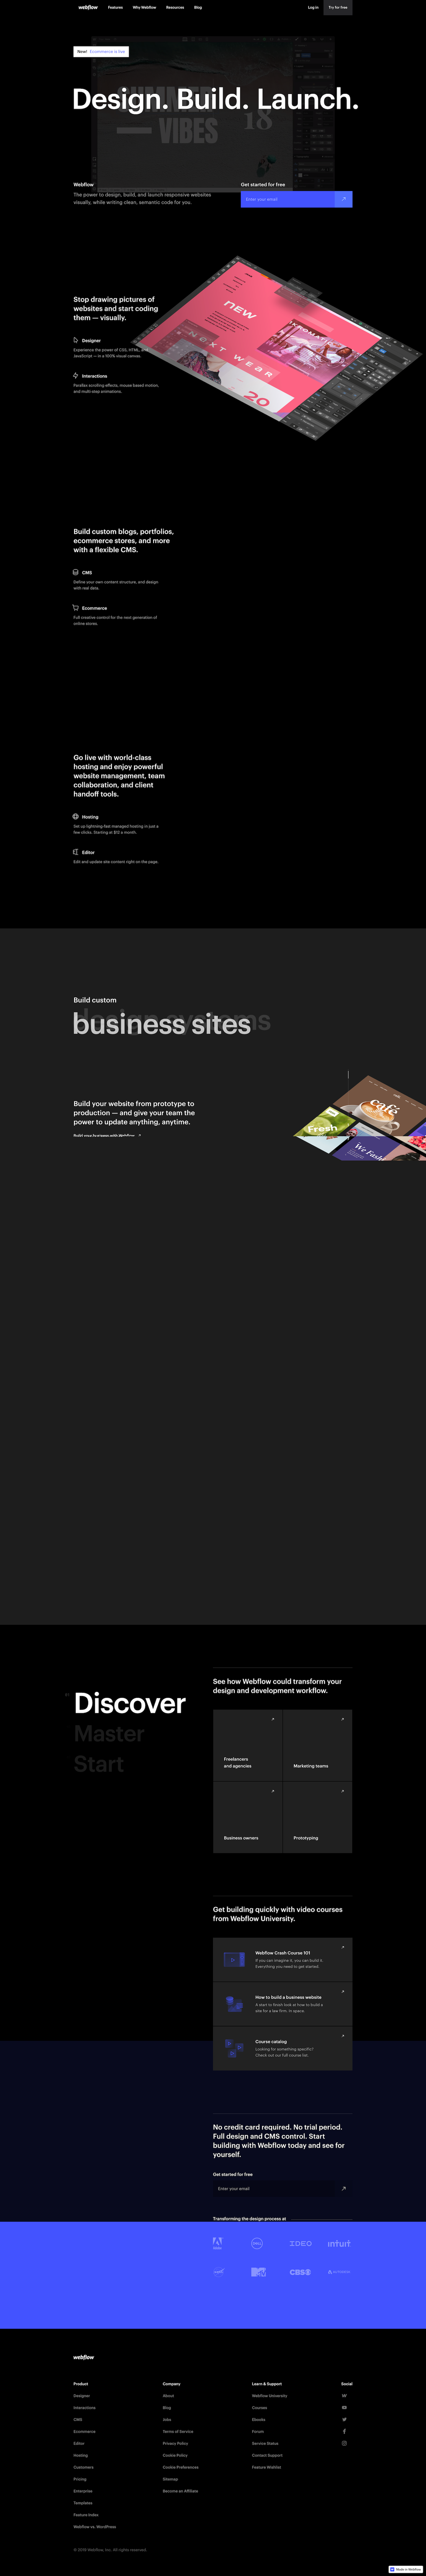 Screenshot of the Home page from the Webflow website.